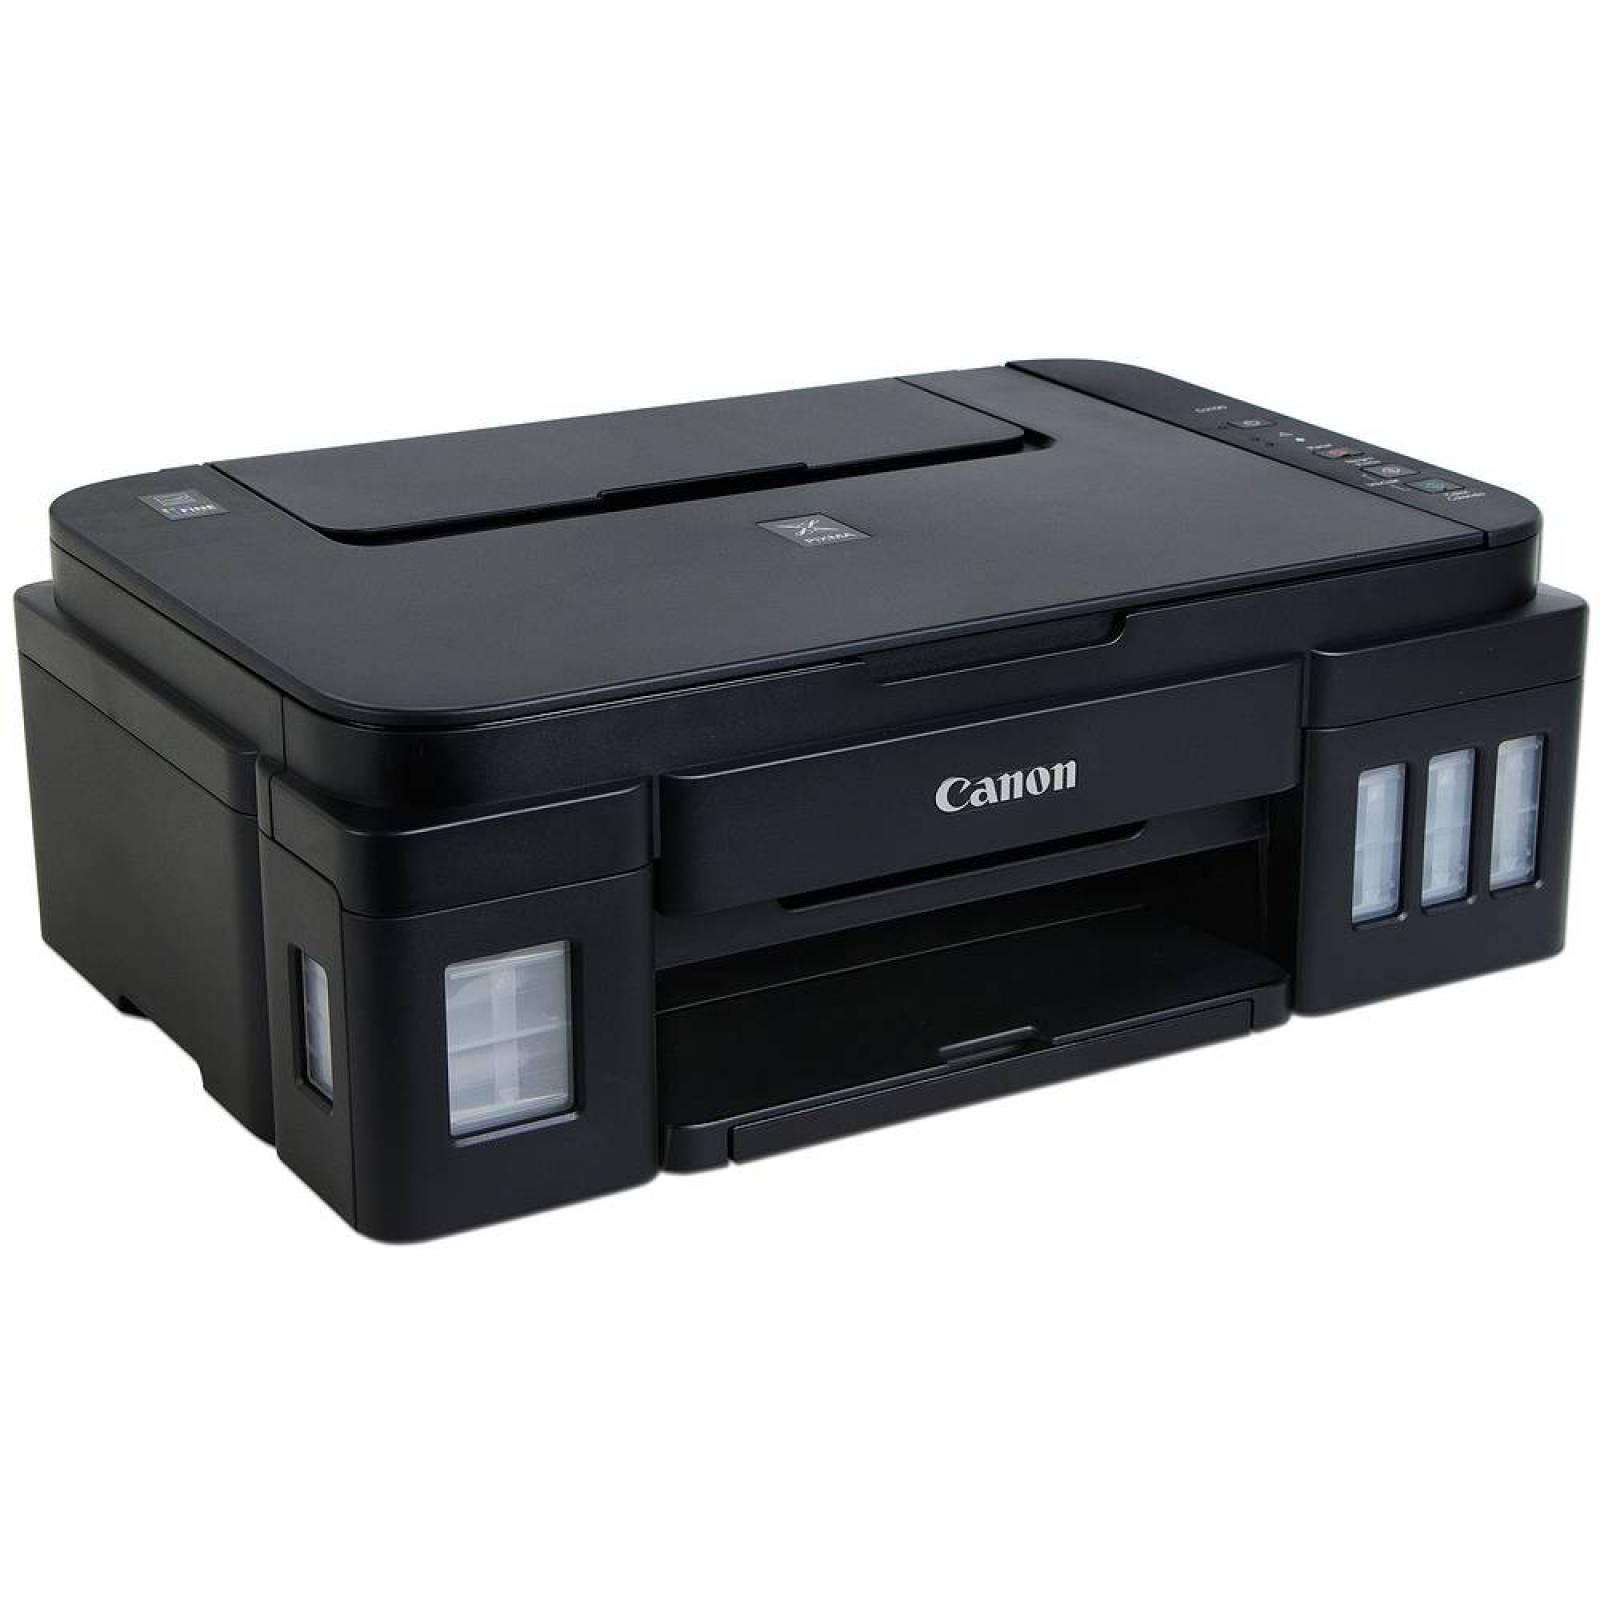 Canon G2100 Has Wifi? / Compatible with 802.11 b/g/n ...